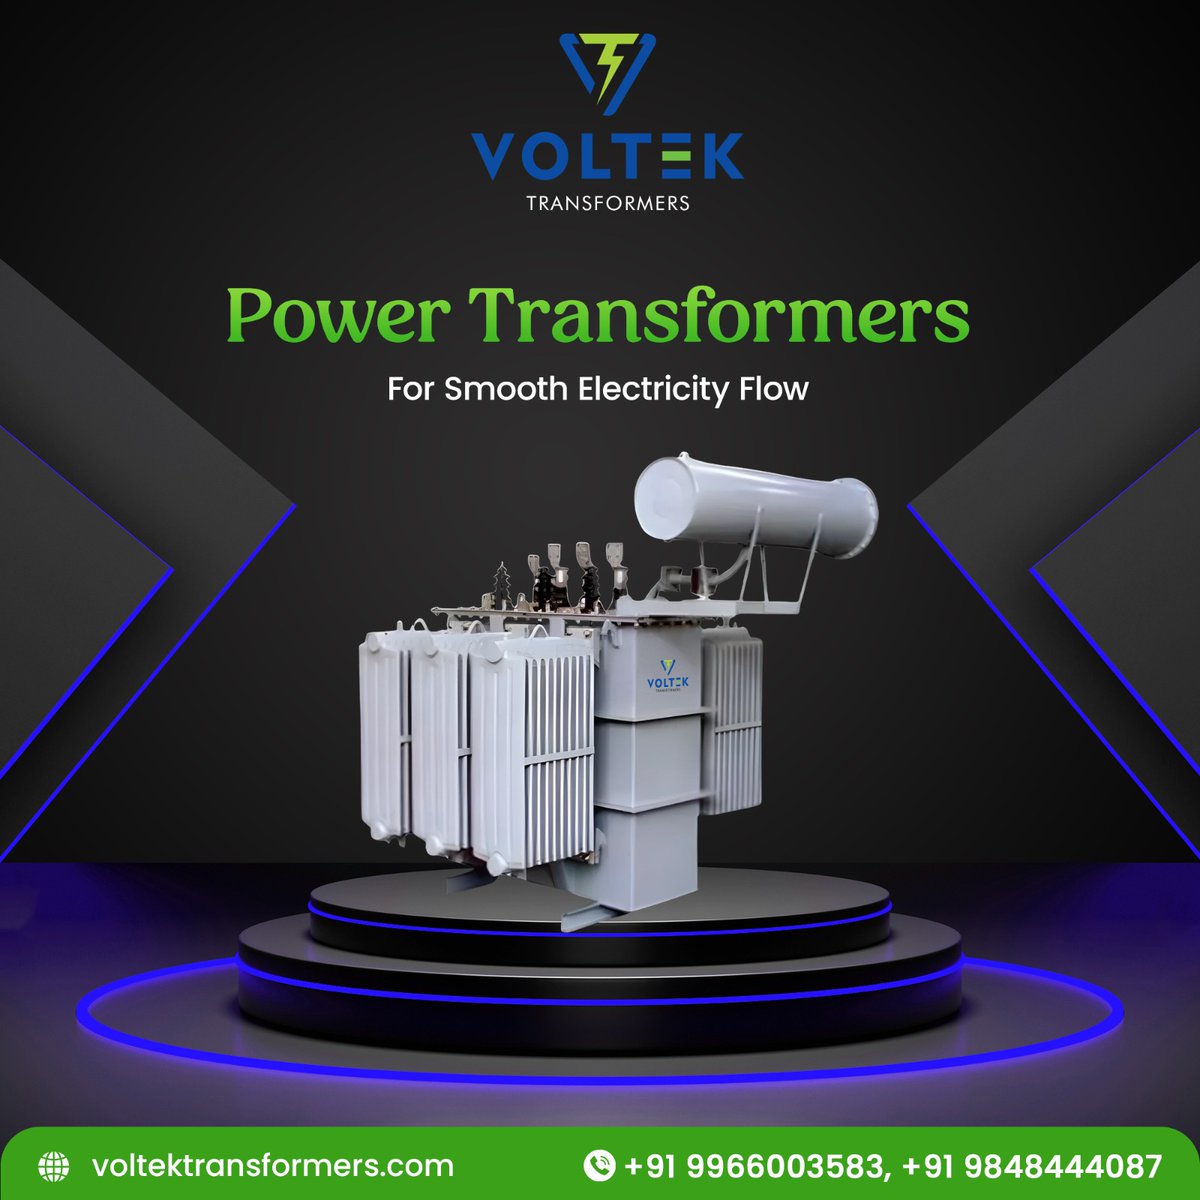 Elevate your power infrastructure with Voltek #Transformers, Hyderabad's top choice for quality and performance. From design to delivery, we're dedicated to excellence. Empower your projects with Voltek today!

🌐 voltektransformers.com

#VoltekTransformers #Powertransformers